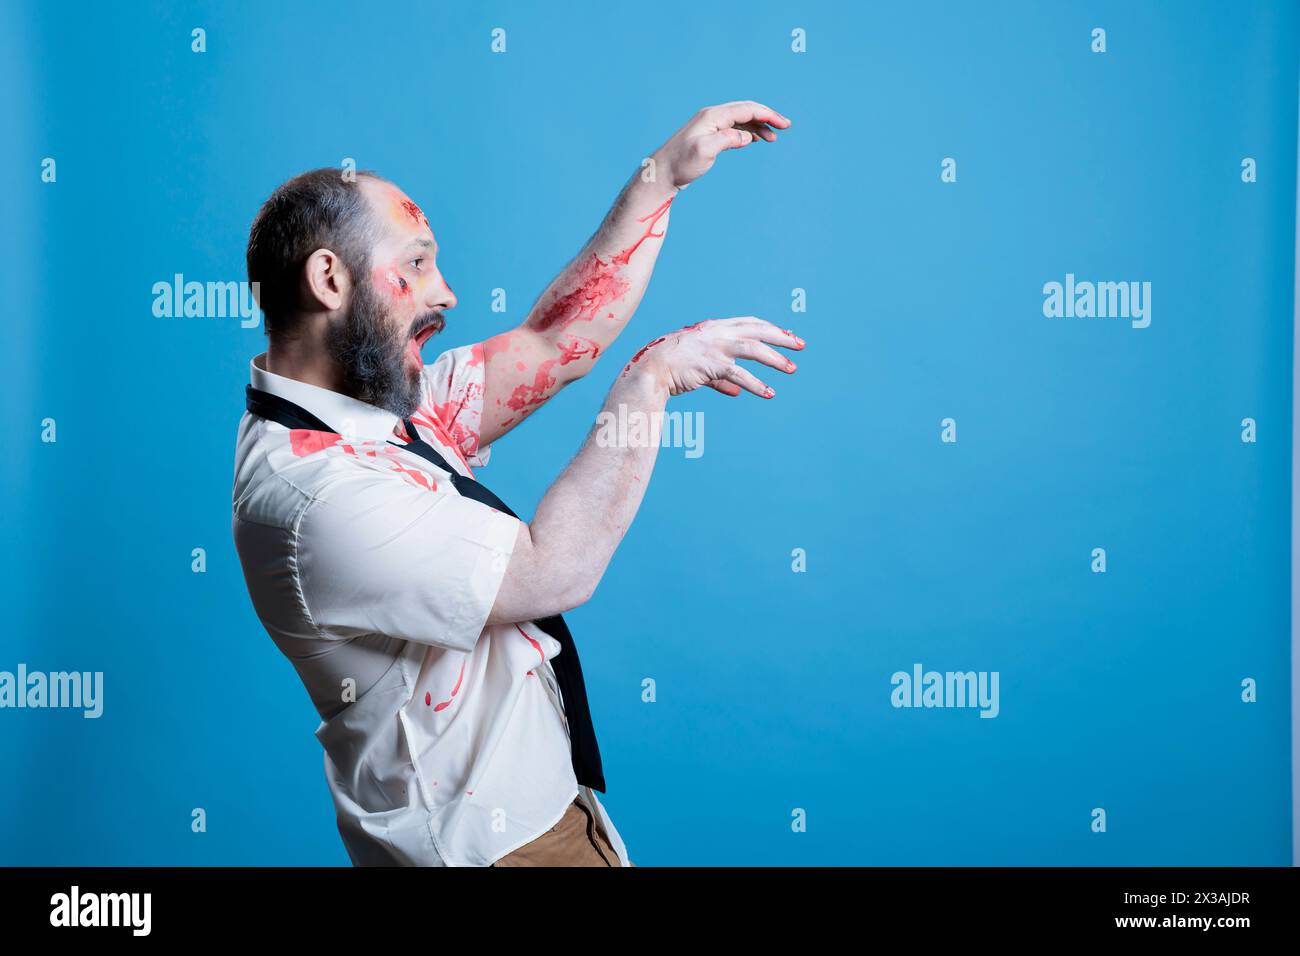 Possessed man covered in blood turned into zombie after being killed, haunting place. Wounded ghoulish cadaver limply walking towards victim, preparing for attack, studio background Stock Photo